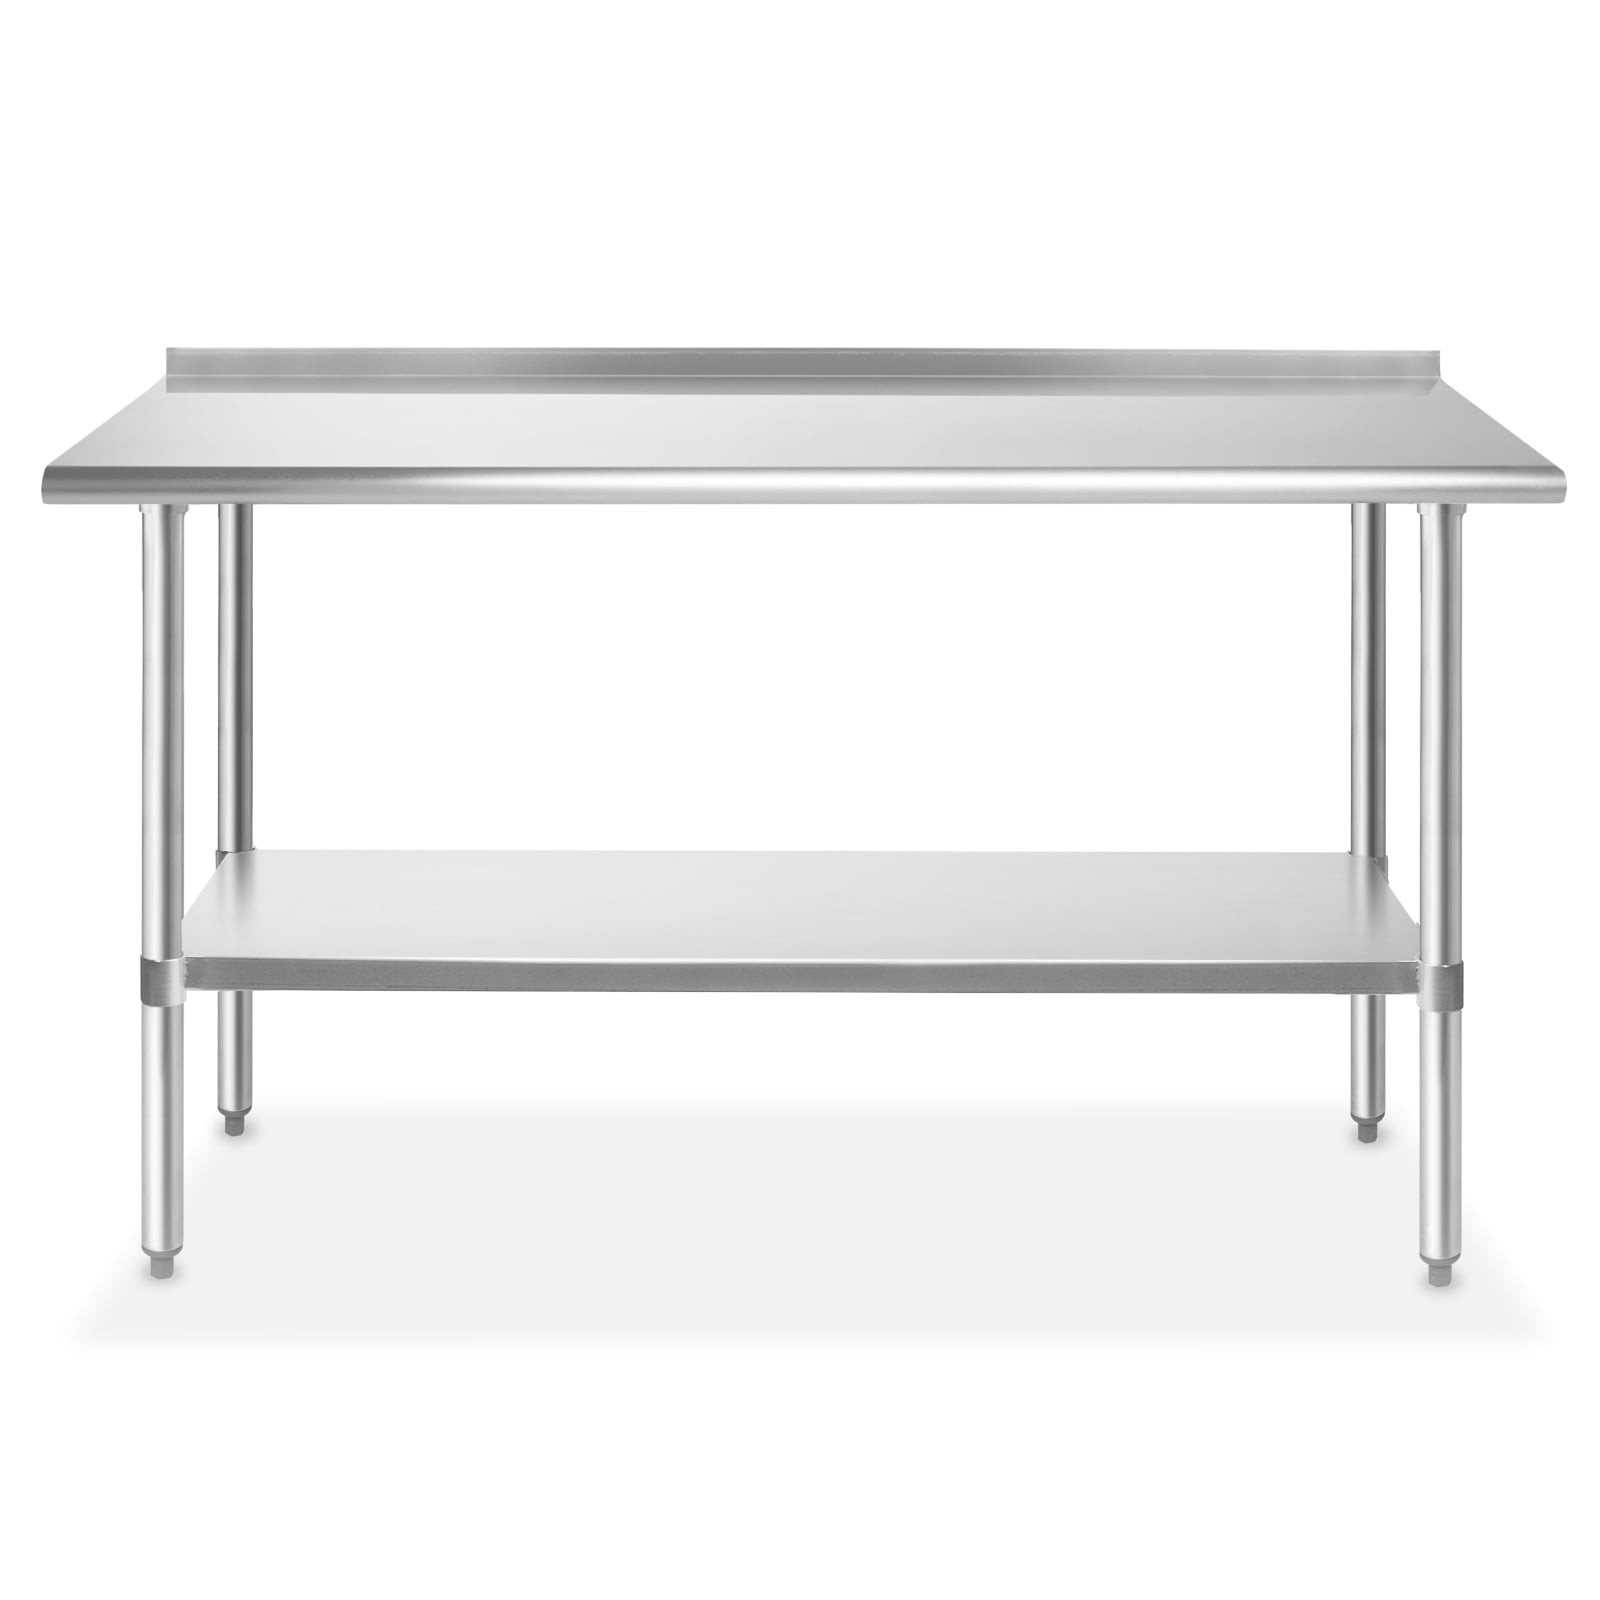 HEAVY DUTY 24" x 60" ALL Stainless Steel Work Prep Table Commercial 16 Gauge NSF